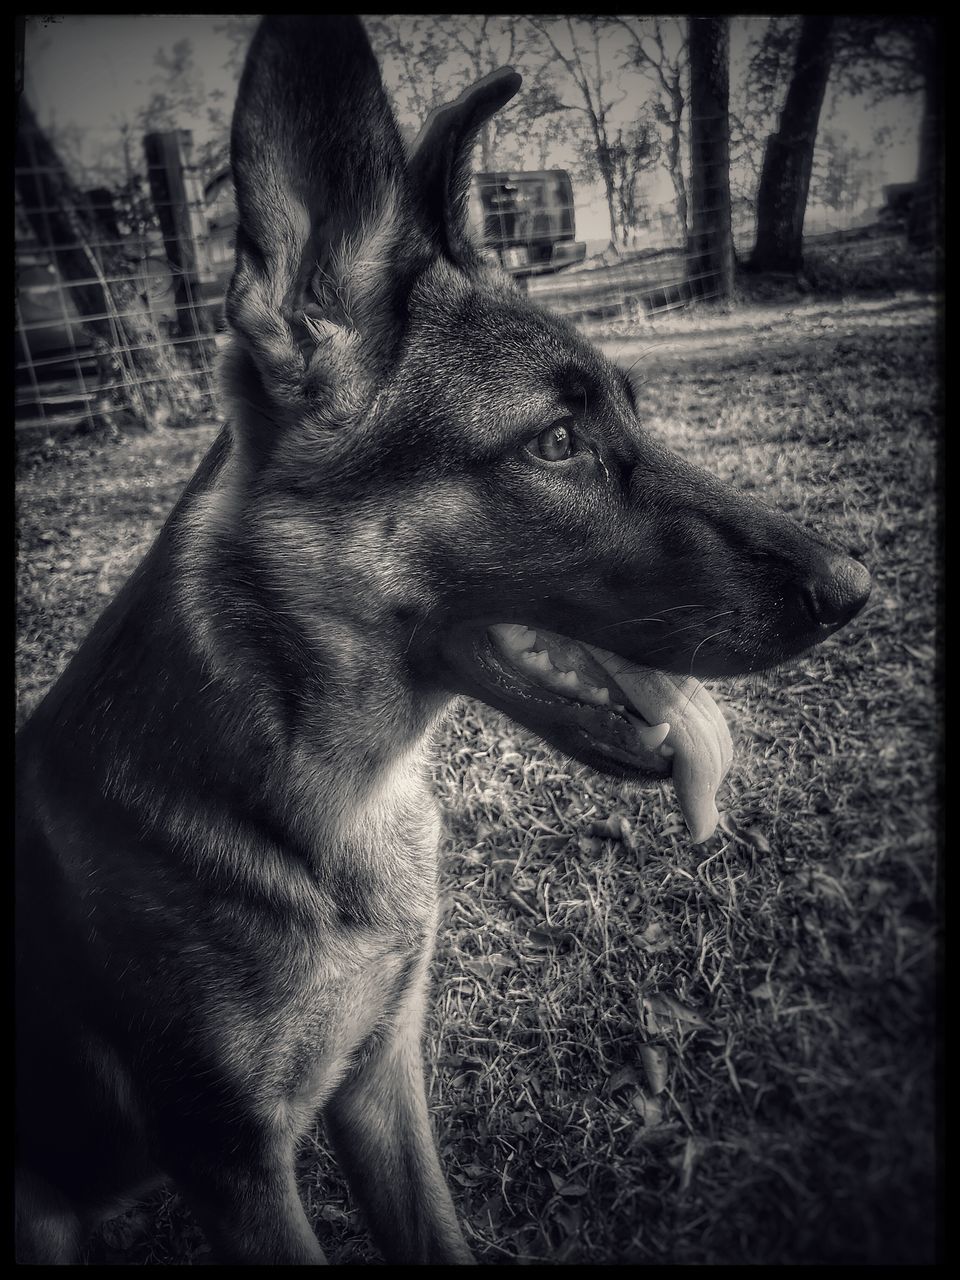 animal themes, one animal, dog, mammal, pets, domestic animals, day, no people, outdoors, german shepherd, close-up, grass, nature